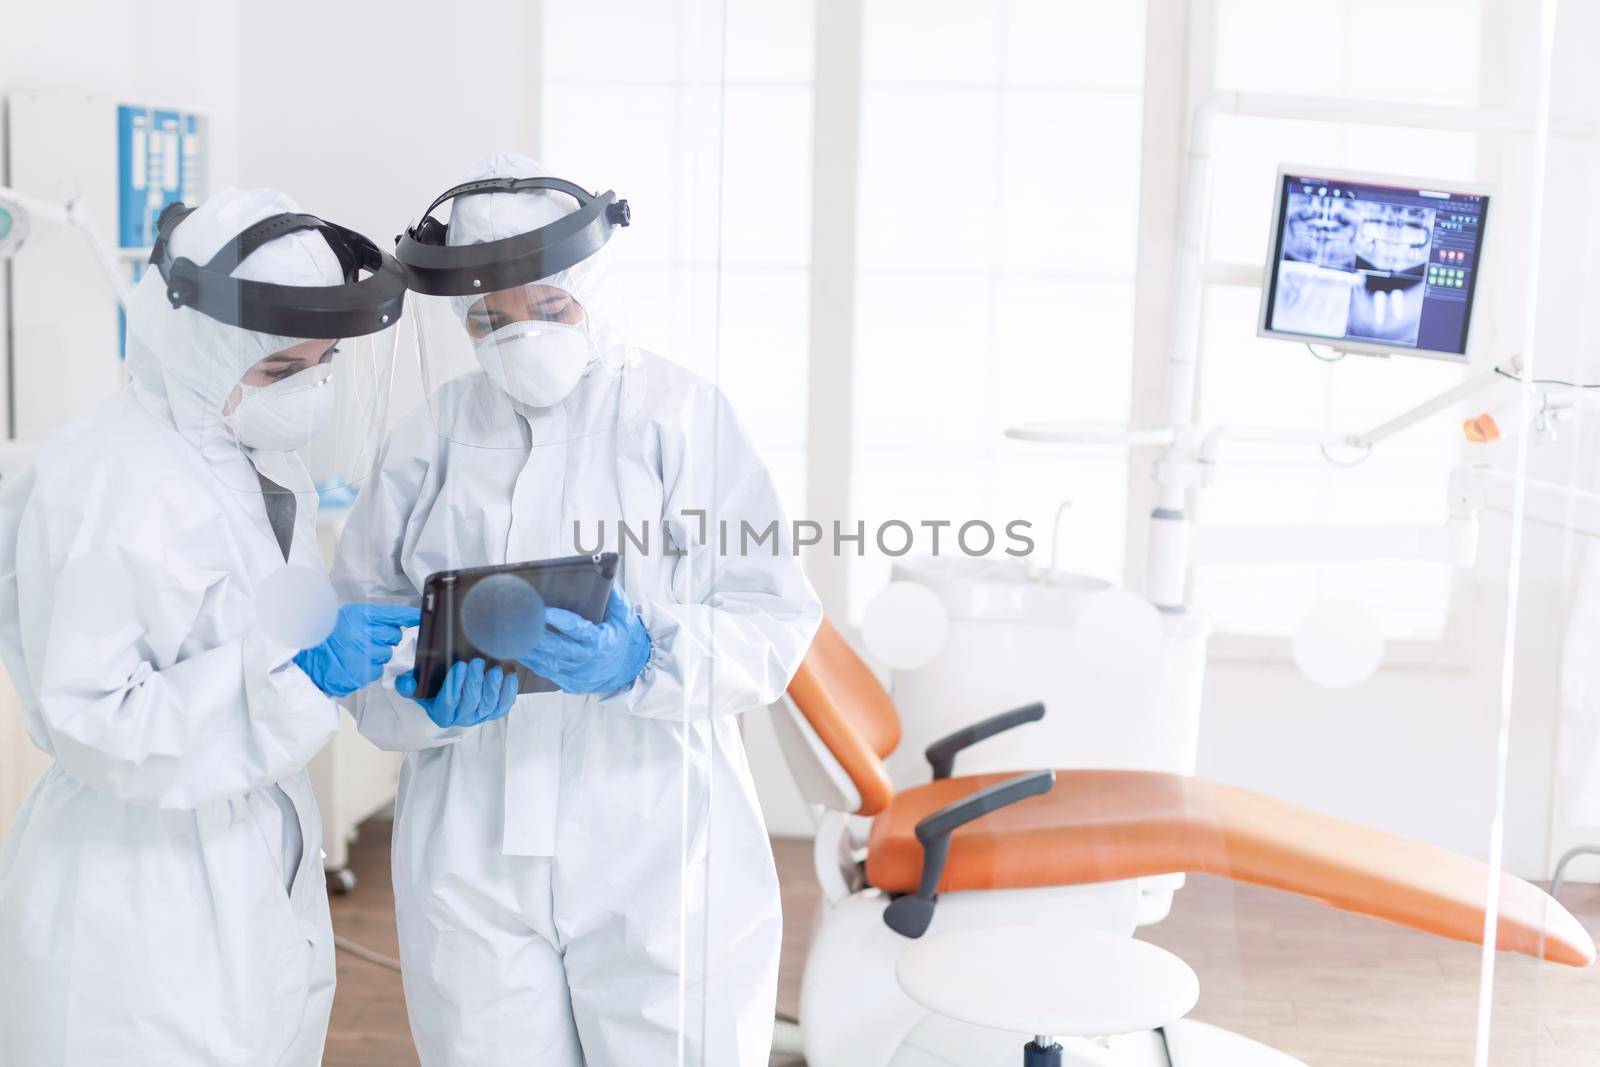 Dentist and nurse during covid-19 outbreak in ppe suit usint tablet pc. Stomatology team in dental office wearing protective suit agasint contagious coronavirus during global pandemic.